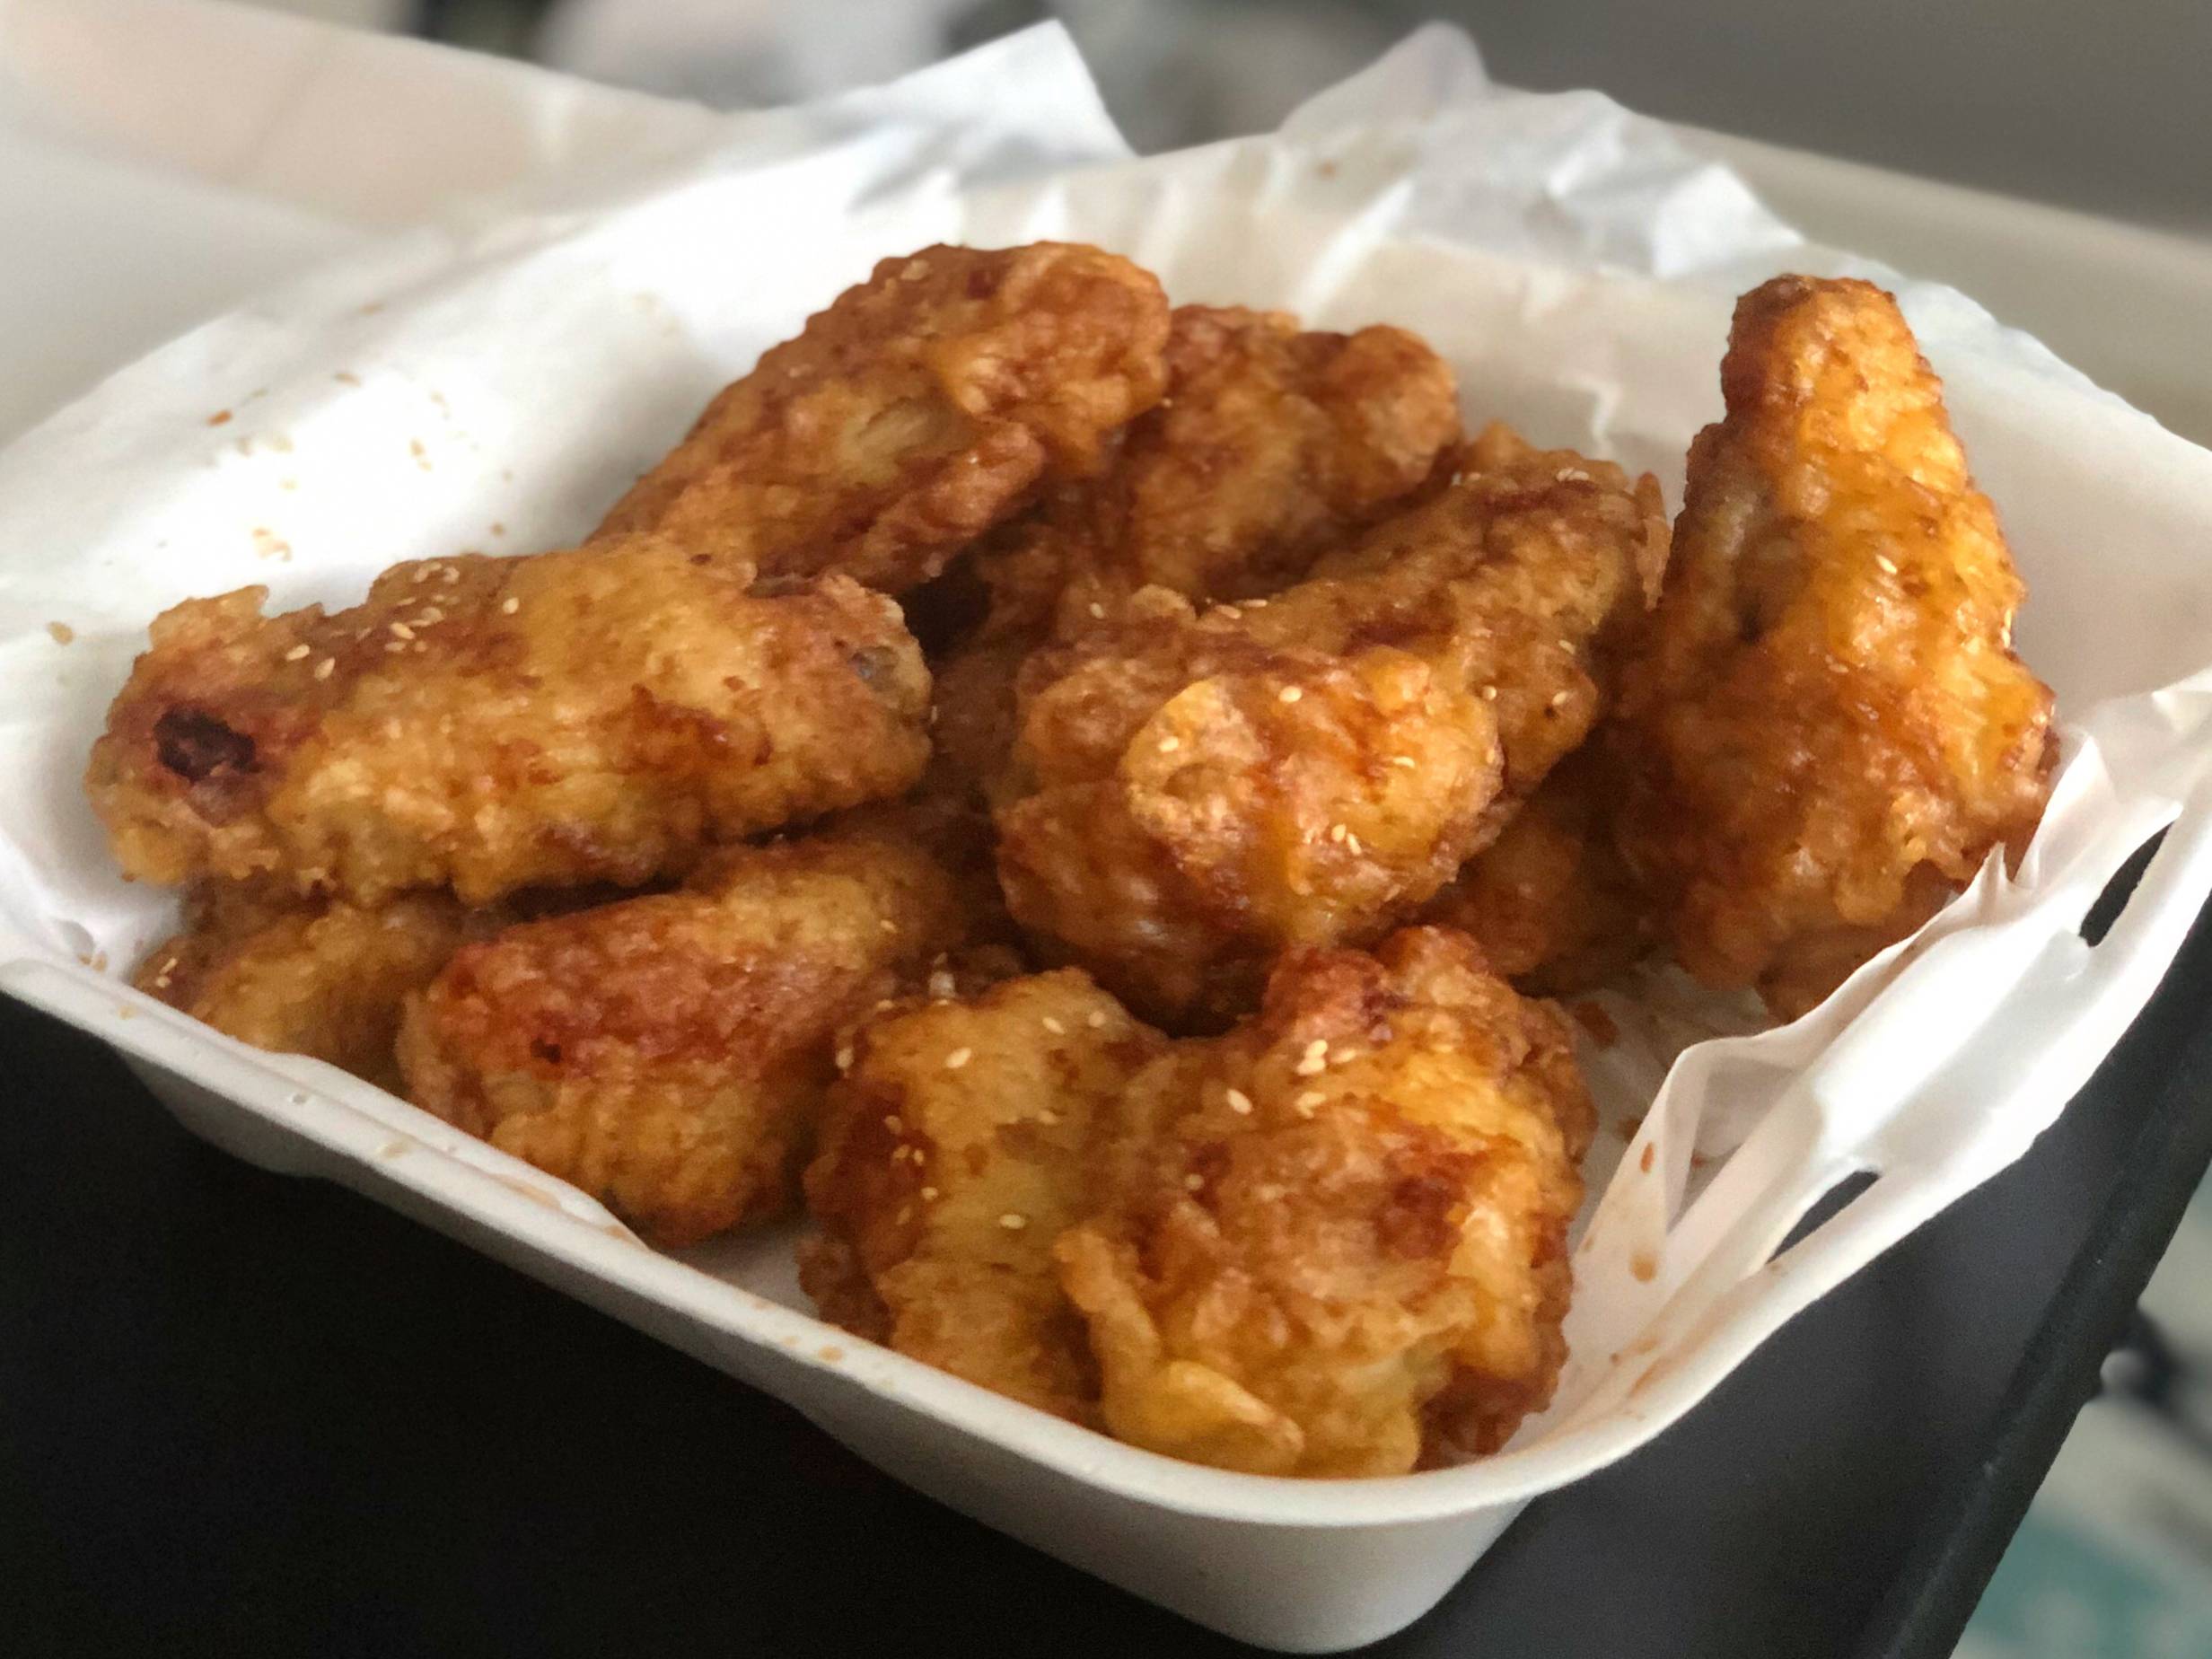 In a white styrofoam container, twelve tempura fried chicken wings with a light brown sauce are stacked high. Photo by Alyssa Buckley.